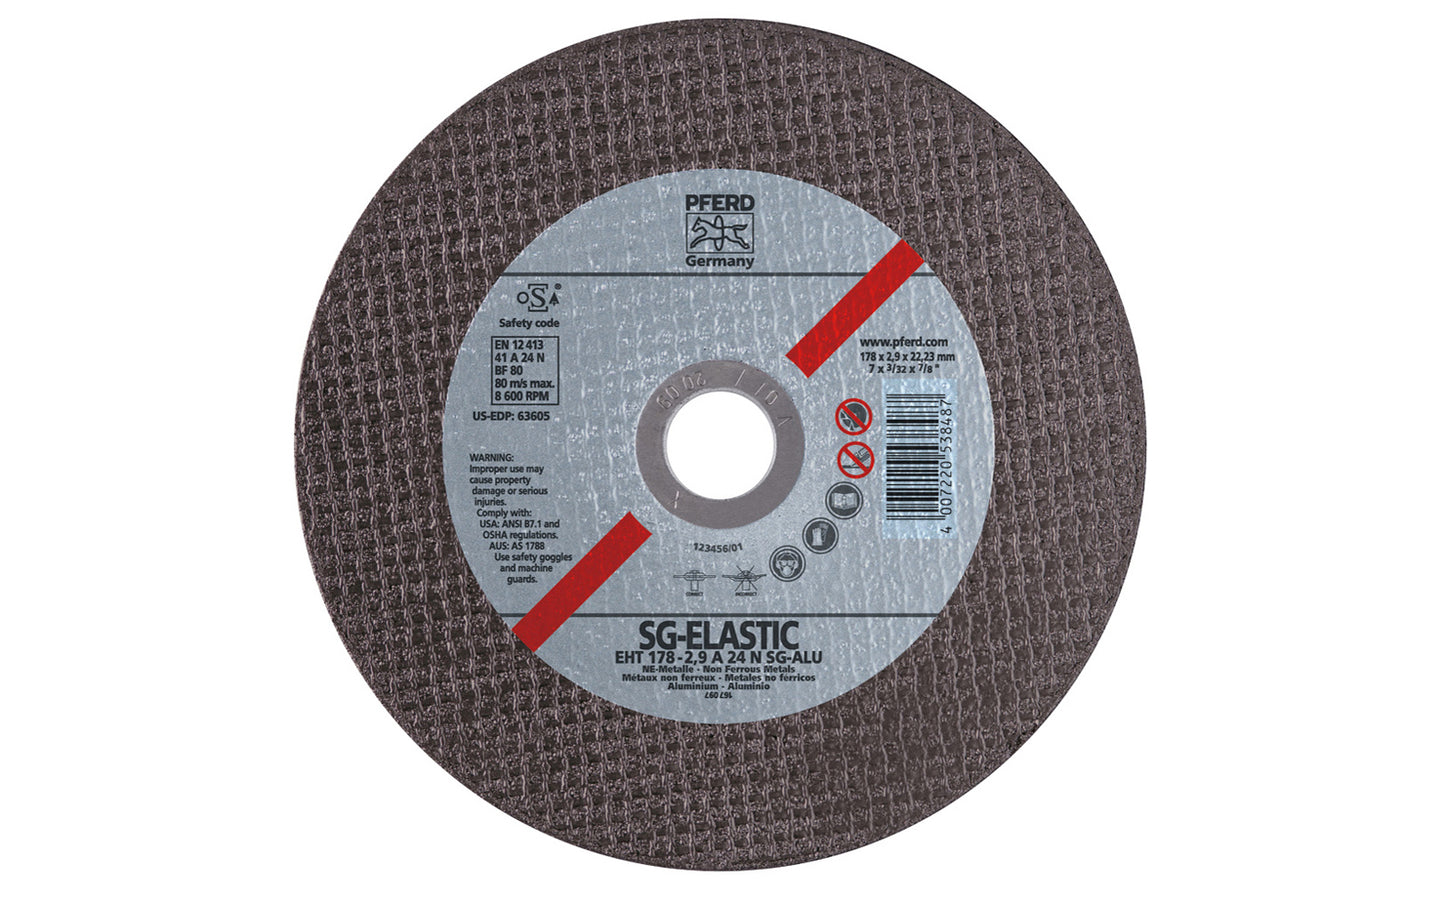 High quality 7" Aluminum Cut-Off Wheel made by Pferd in Germany. This cut off disc is designed for aluminum, but also suitable for copper, brass, bronze, & non-ferrous metals. Fast cutting action. 7" diameter of wheel. 7/8" arbor hole diameter. 1/8" thick blade. 4007220163481. Model 63605. Made in Germany.